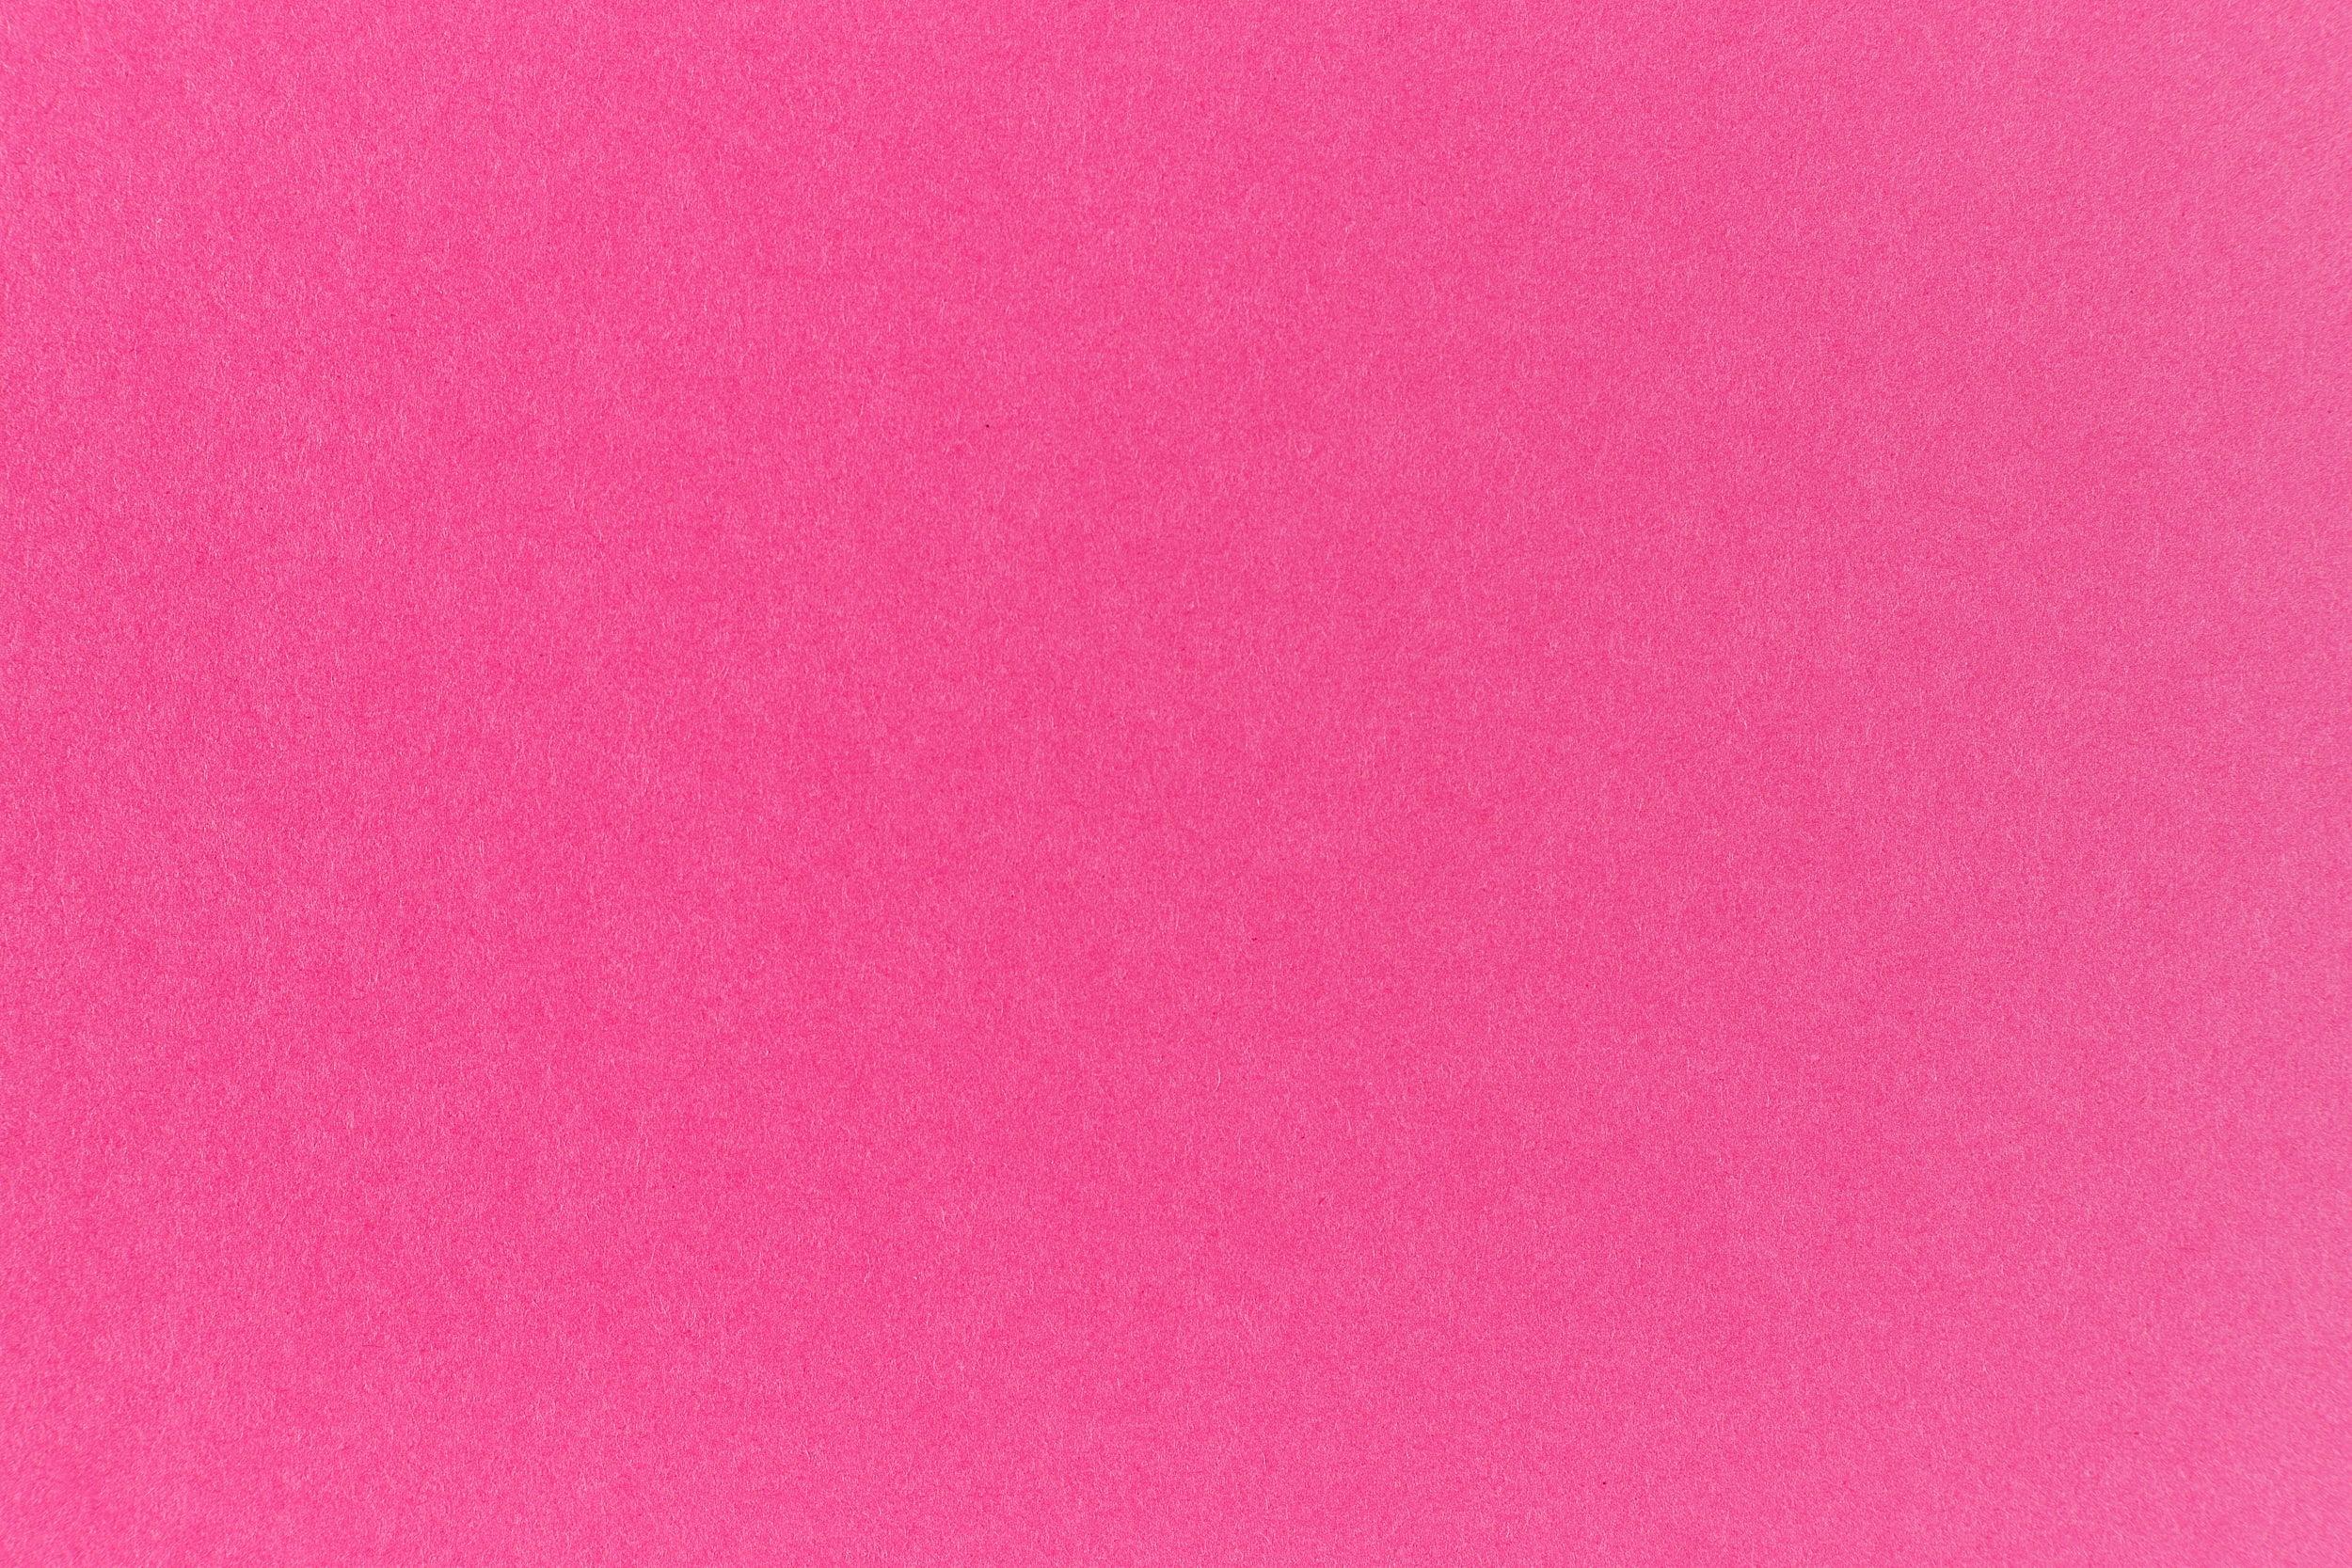  Cardstock Warehouse Pop Tone Red Hot - 12 x 12 - 100